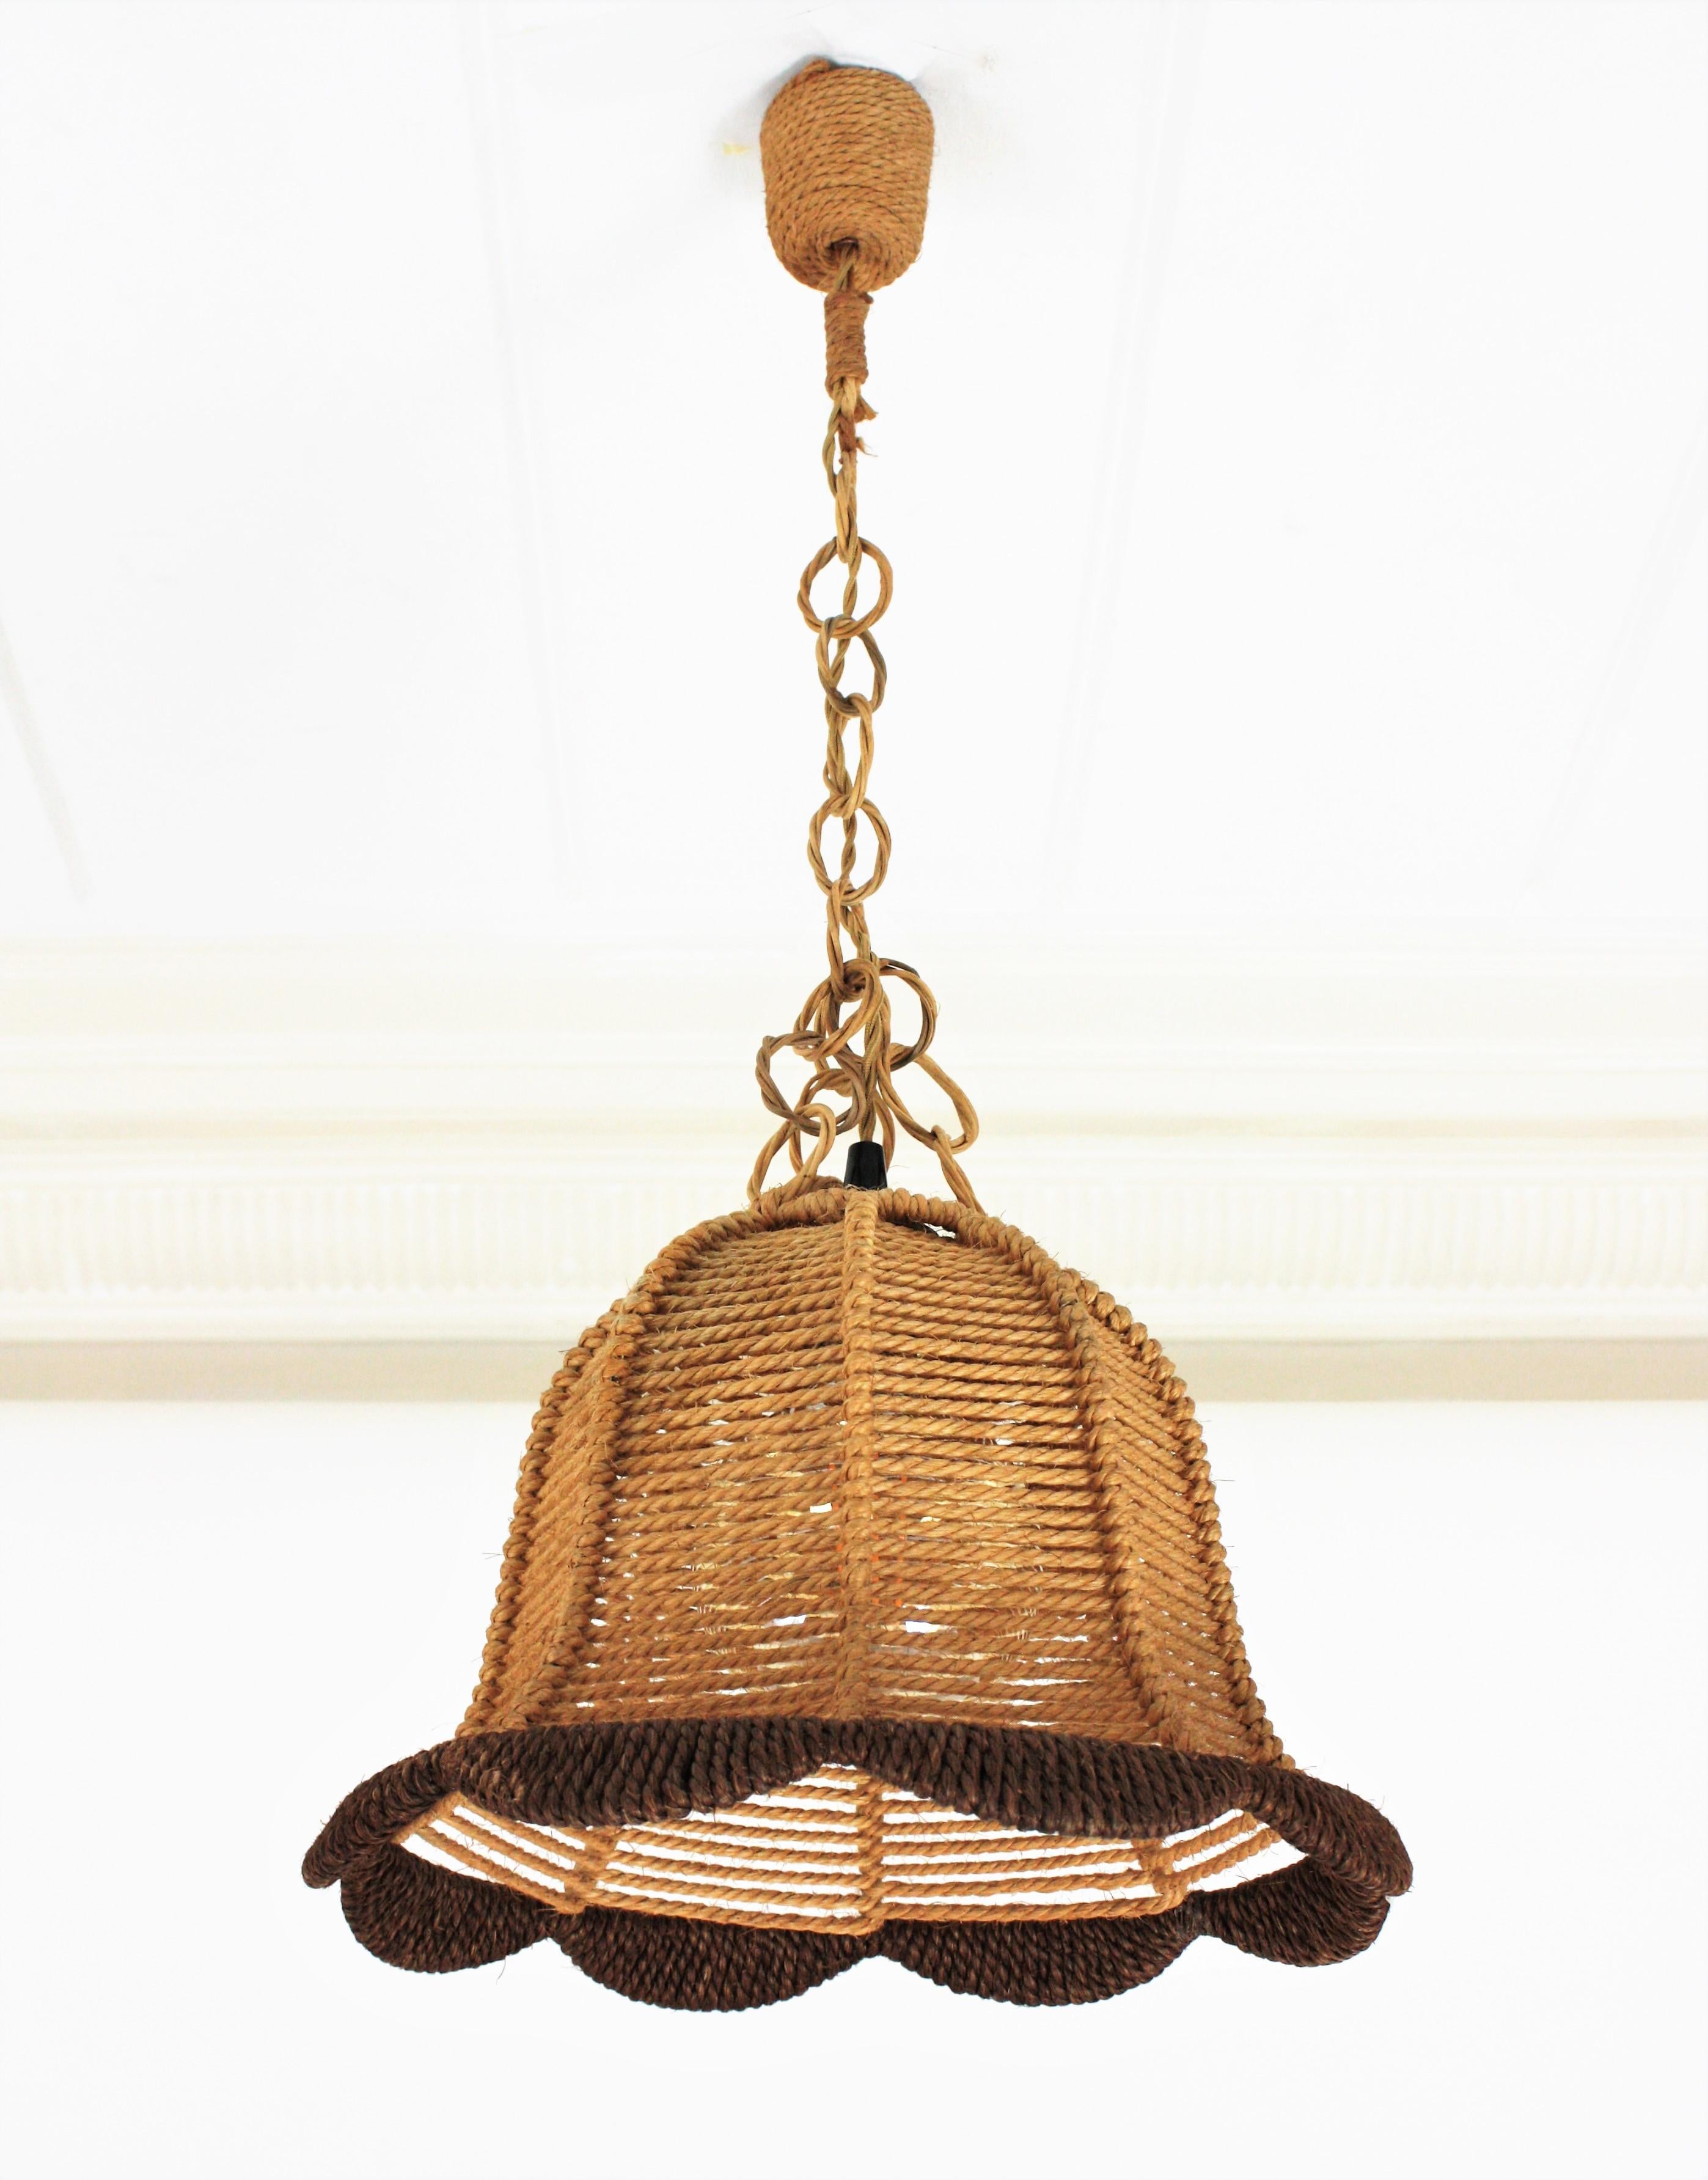 Eye-catching vintage bell shaped rope pendant light or lanternwith rattan chain, Spain, 1960s.
This midcentury suspension lamp features a bell shaped rope covered lampshade combining beige and brown rope. It hangs from a chain with rattan links